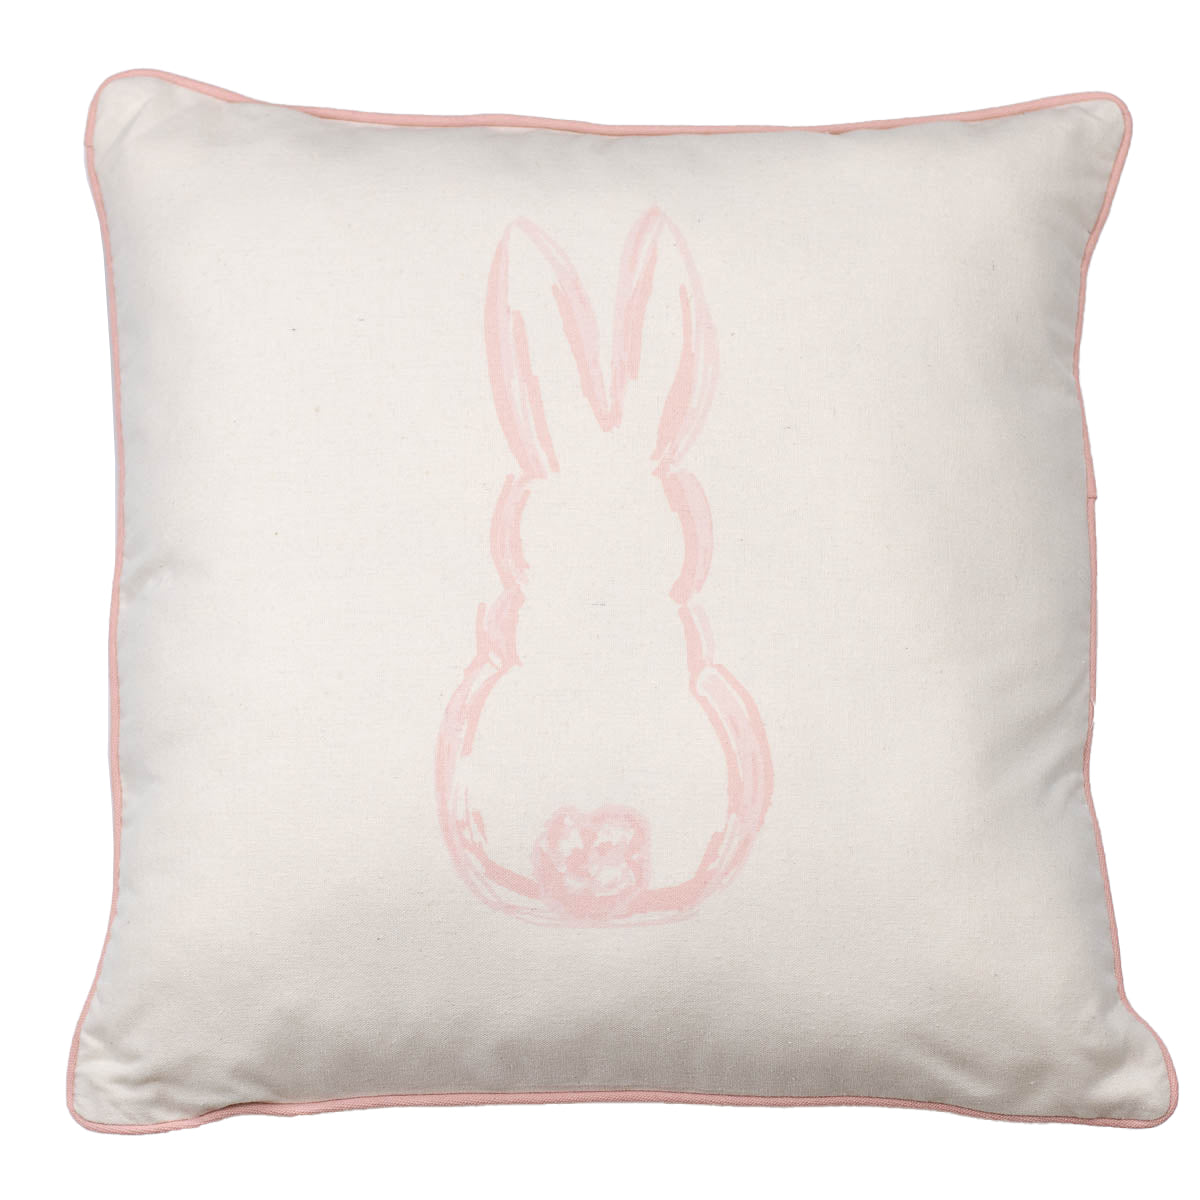 Lily Belle Bunny Pillow